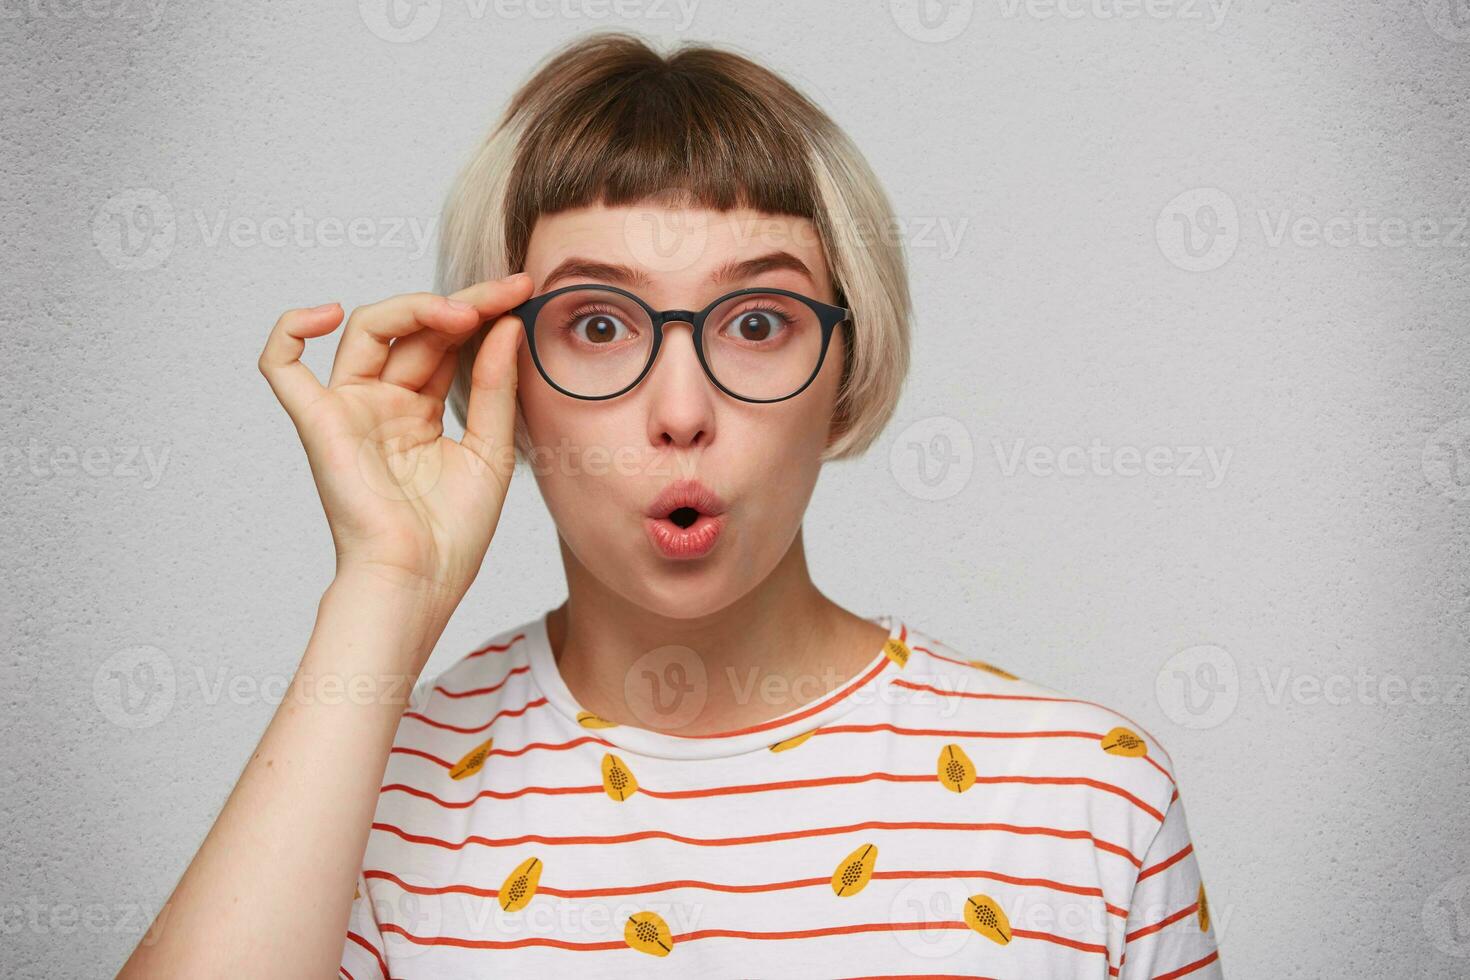 Portrait of shocked stunned young woman wears striped t shirt and glasses feels amazed and looks directly in camera isolated over white background photo